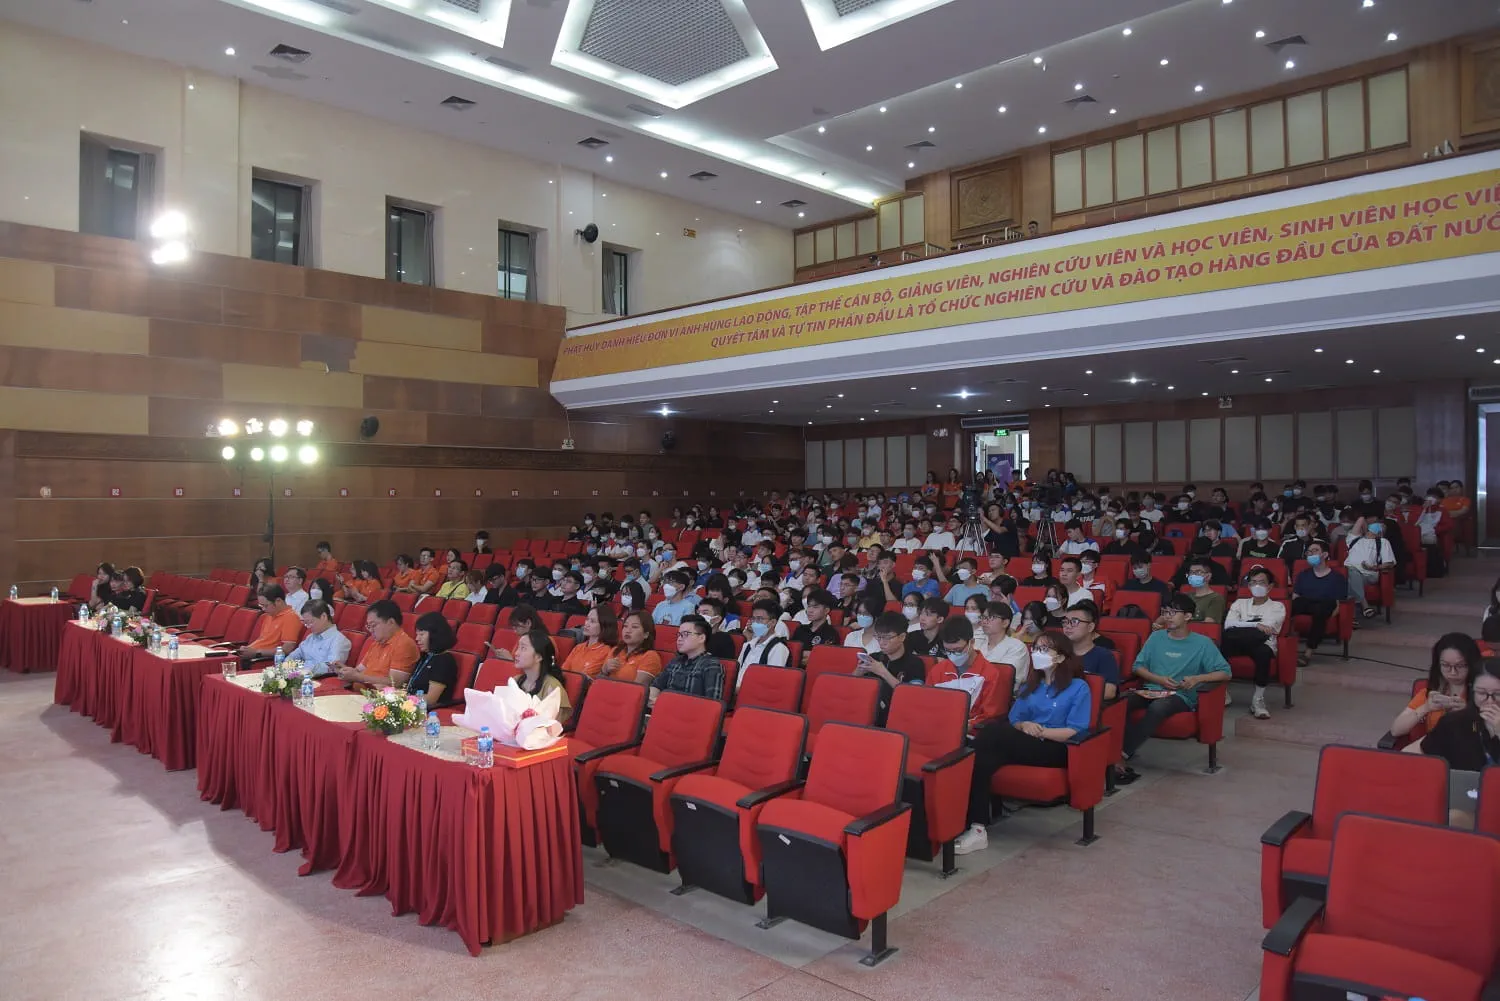 FPT Corporation kicked off a series of "Leader Talk - Journey To Your Future" shows for technology students, starting at the Posts and Telecommunications Institute of Technology (PTIT)